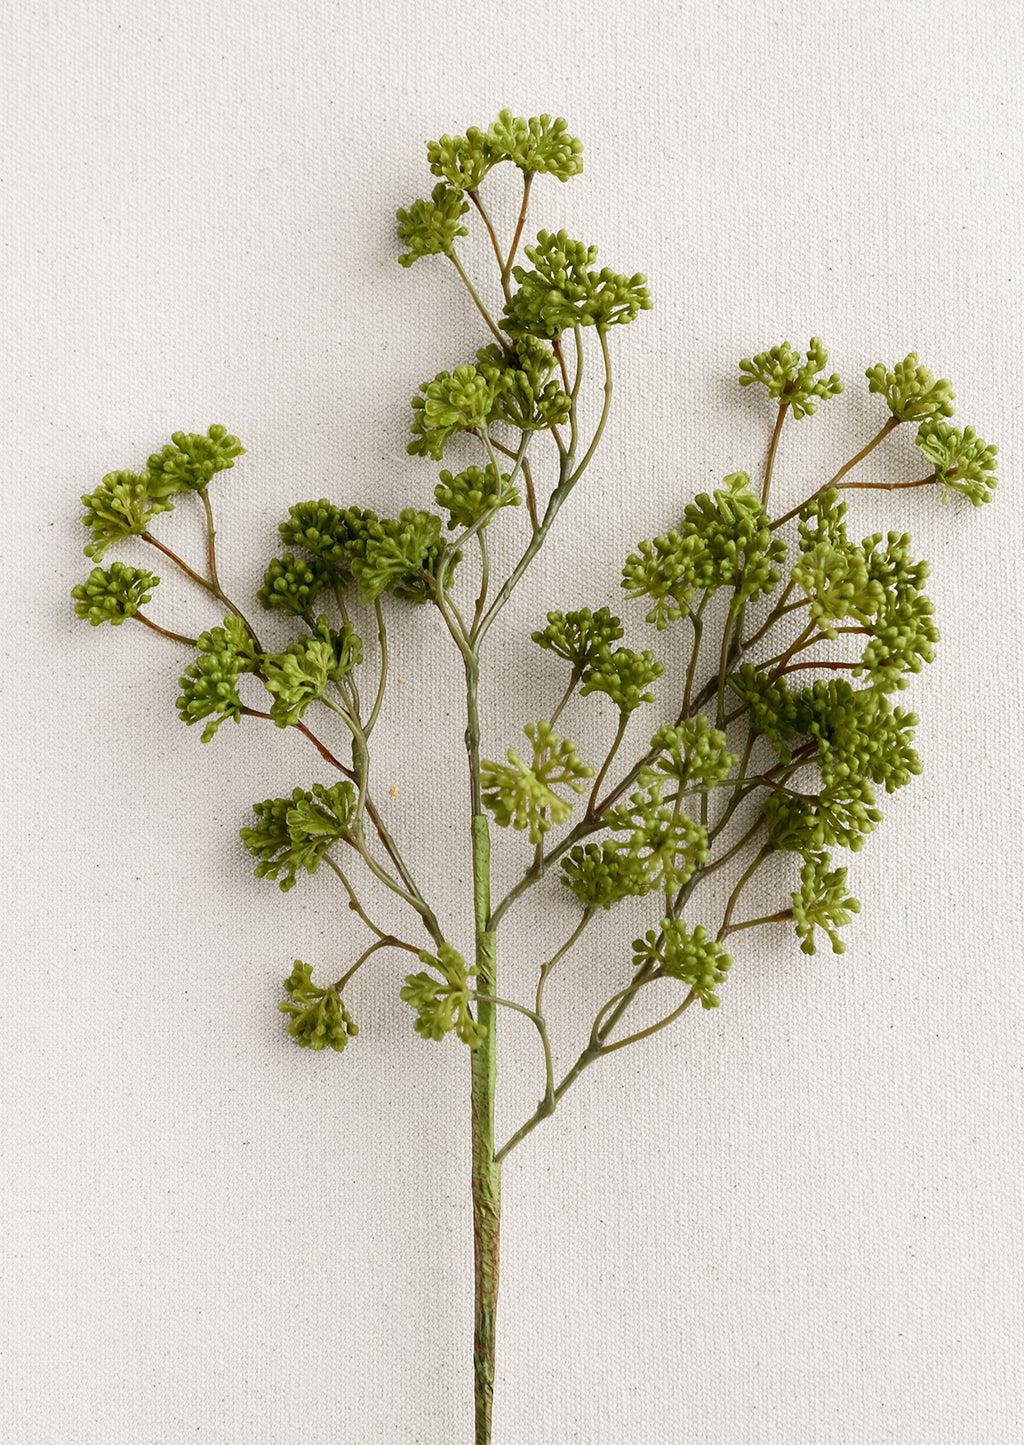 Spring Green: A faux sedum branch with dainty buds in green.